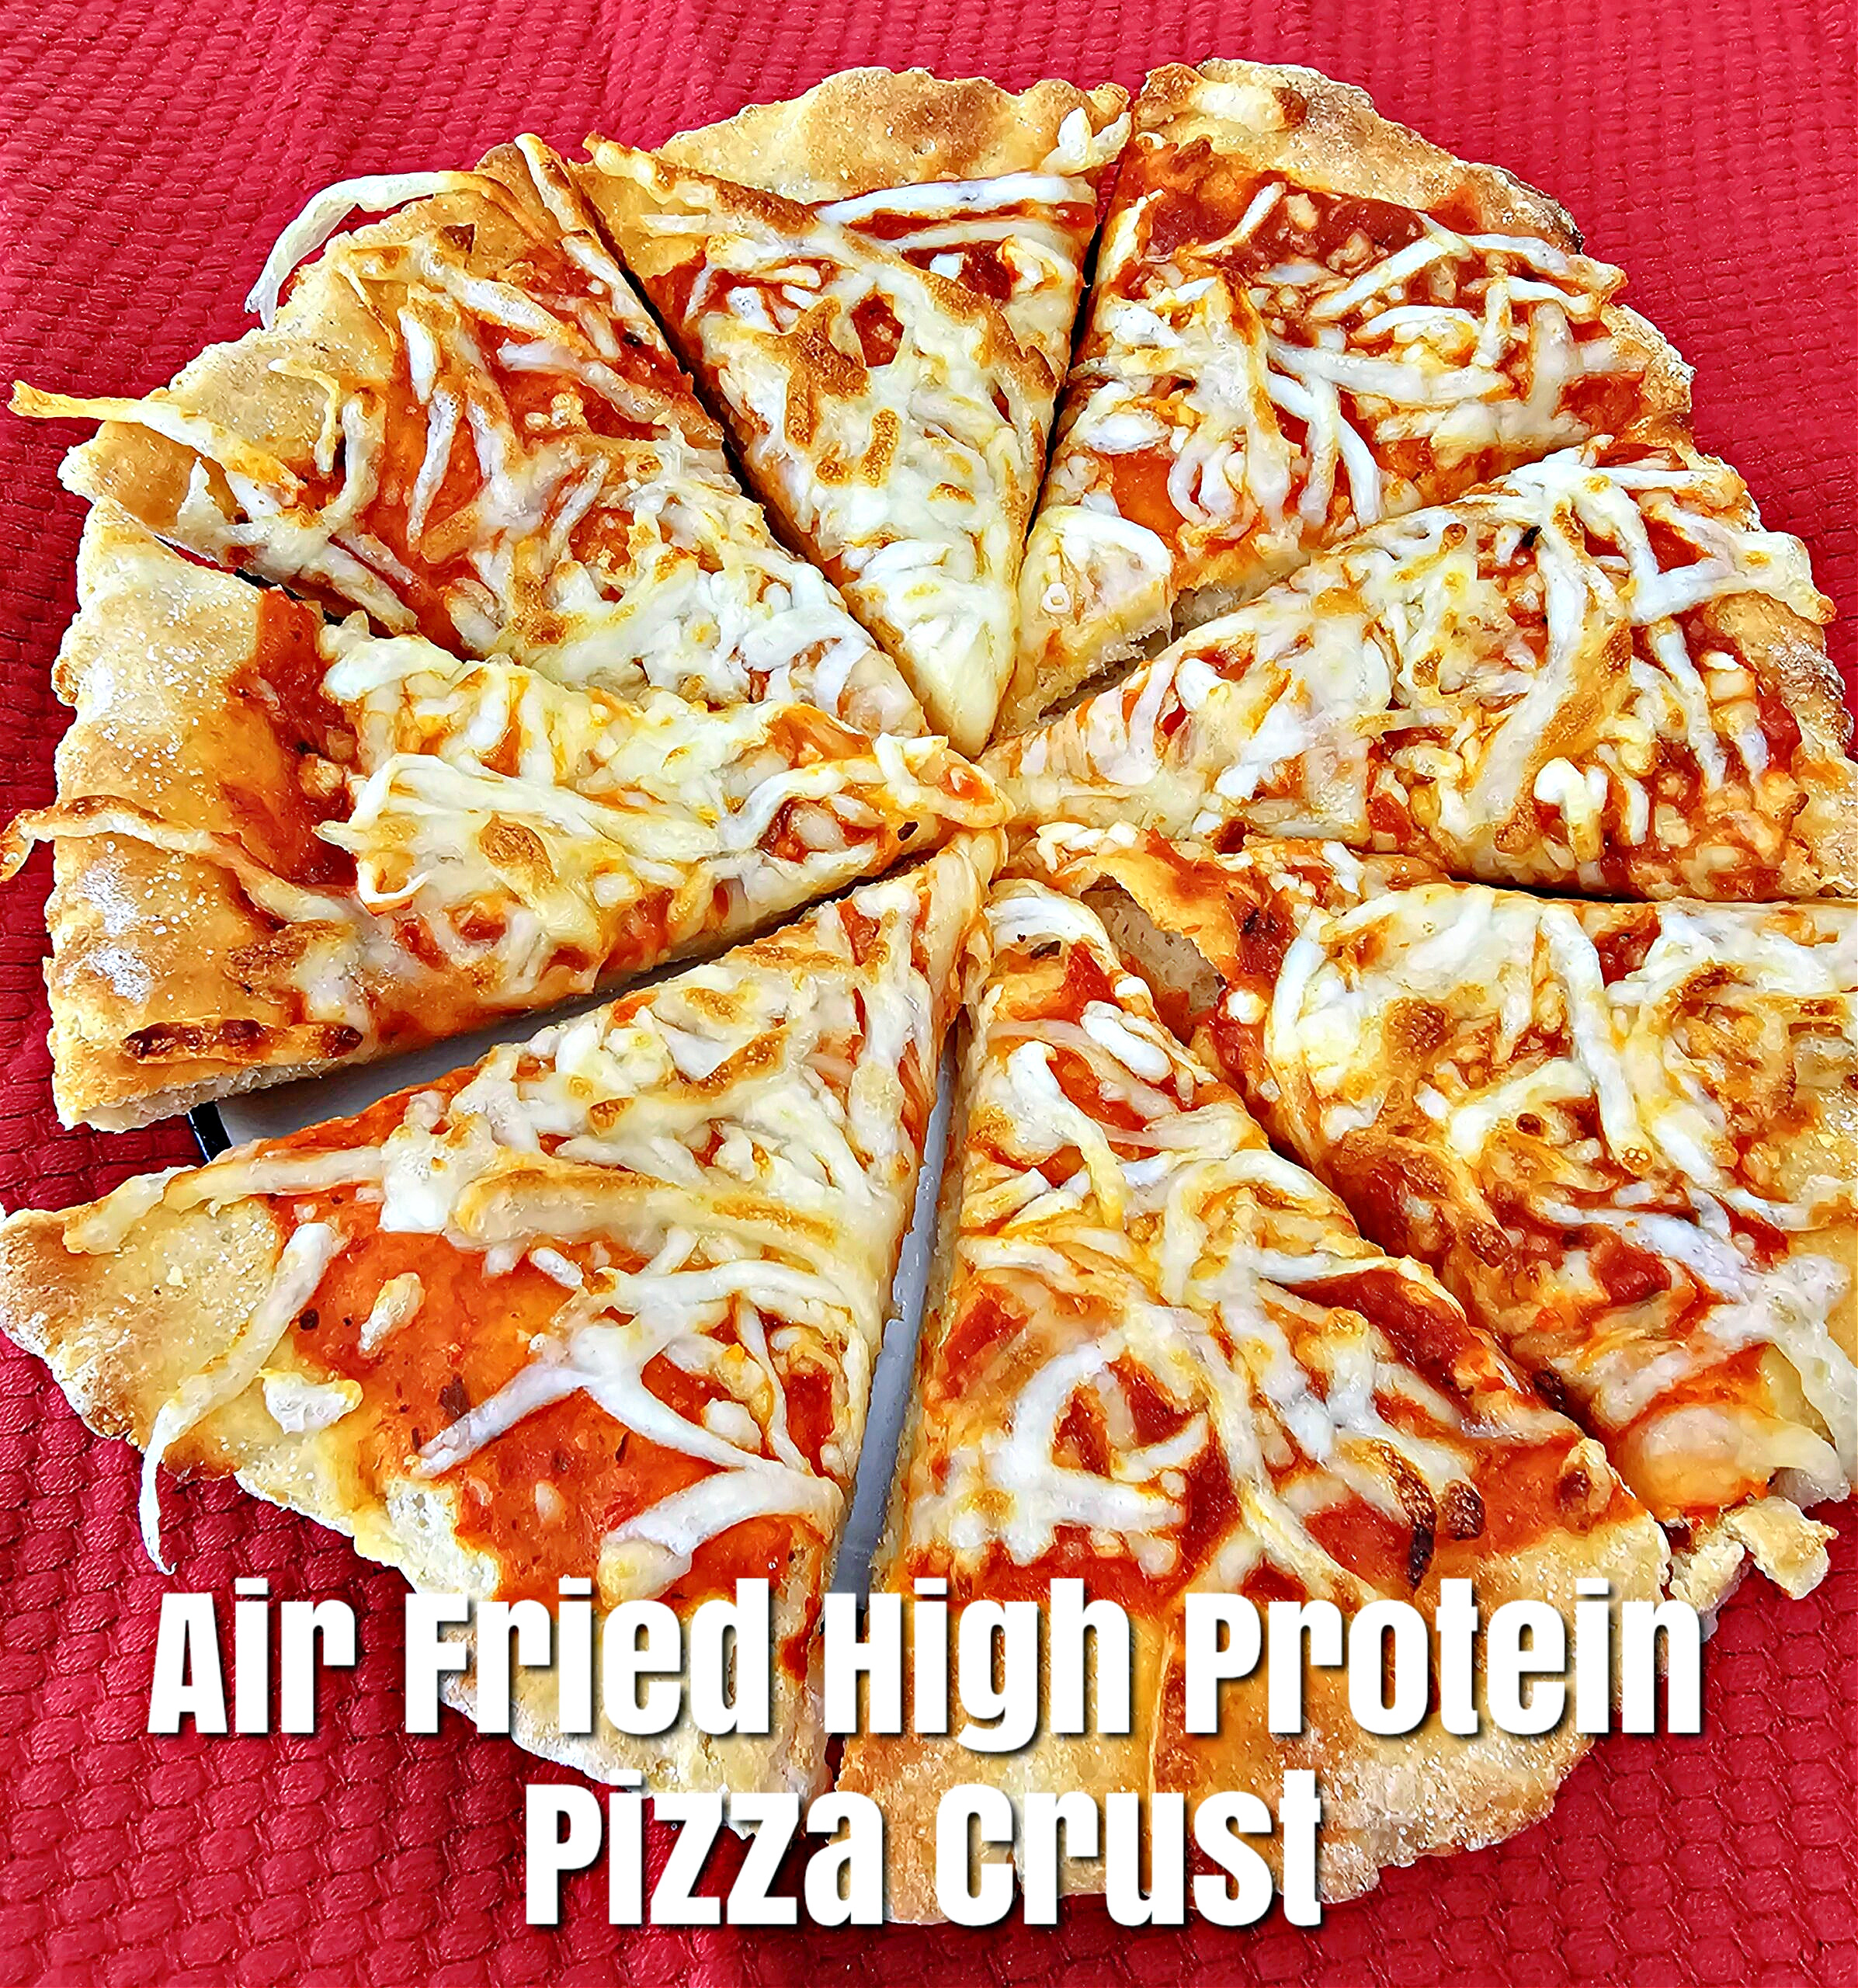 Air Fried High Protein Pizza Crust #airfryer #pizzacrust #pizza #highprotein #dinner 